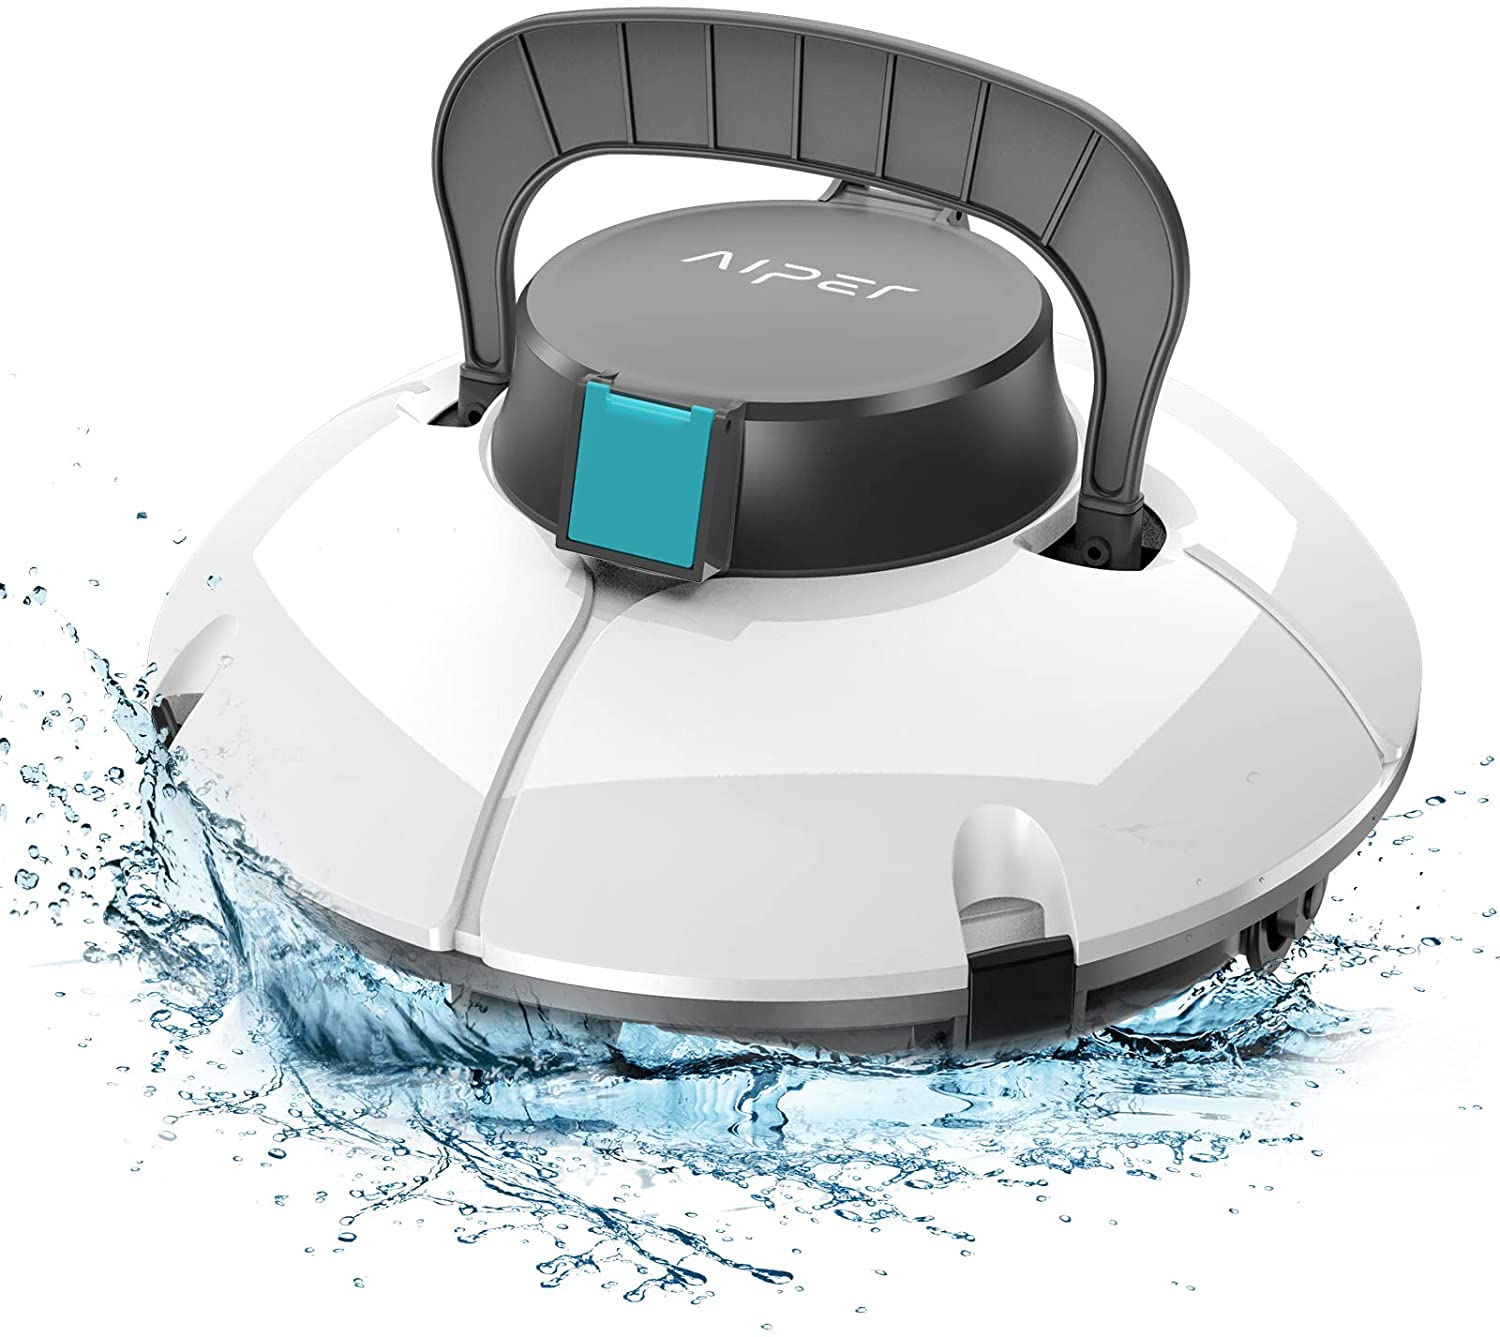 Aiper Smart HJ1102 Cordless Automatic Pool Cleaner